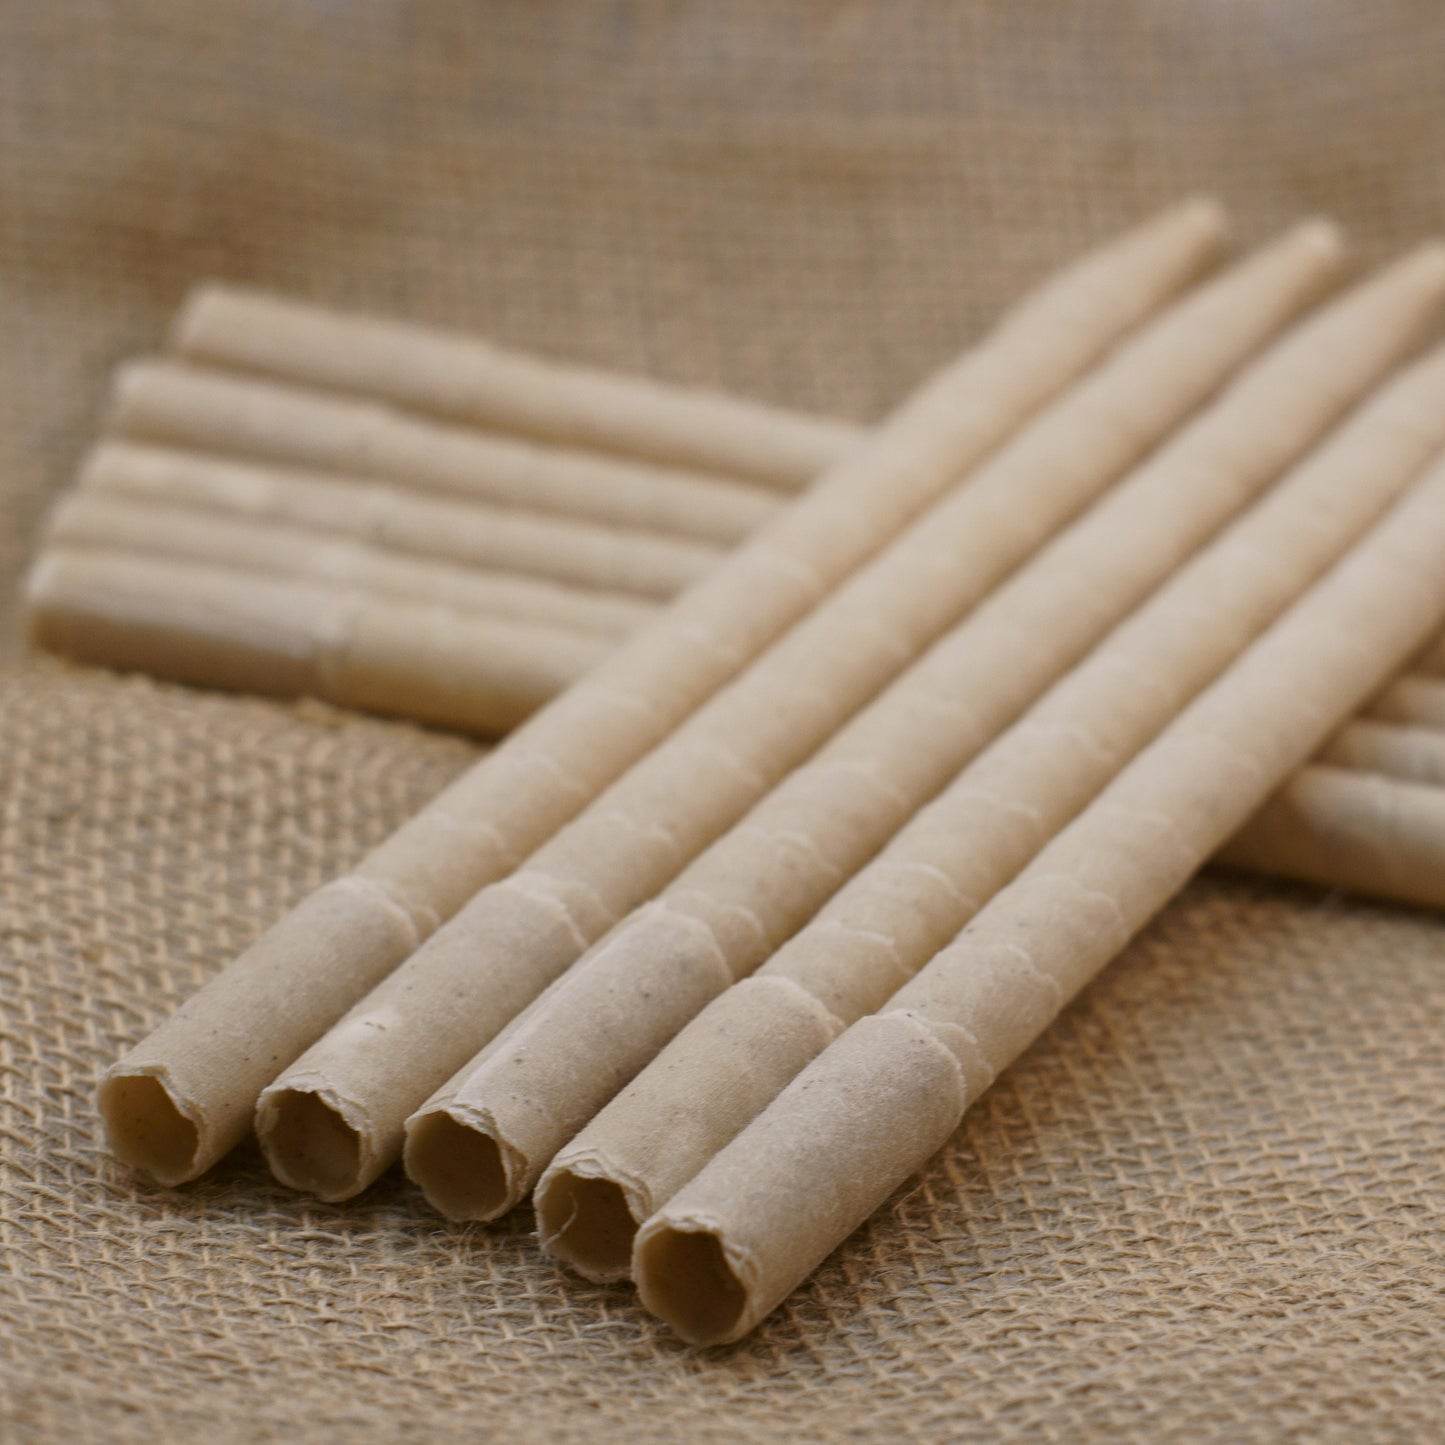 Ear Candles 10pk Beeswax - All Natural No Additives - Made in the USA